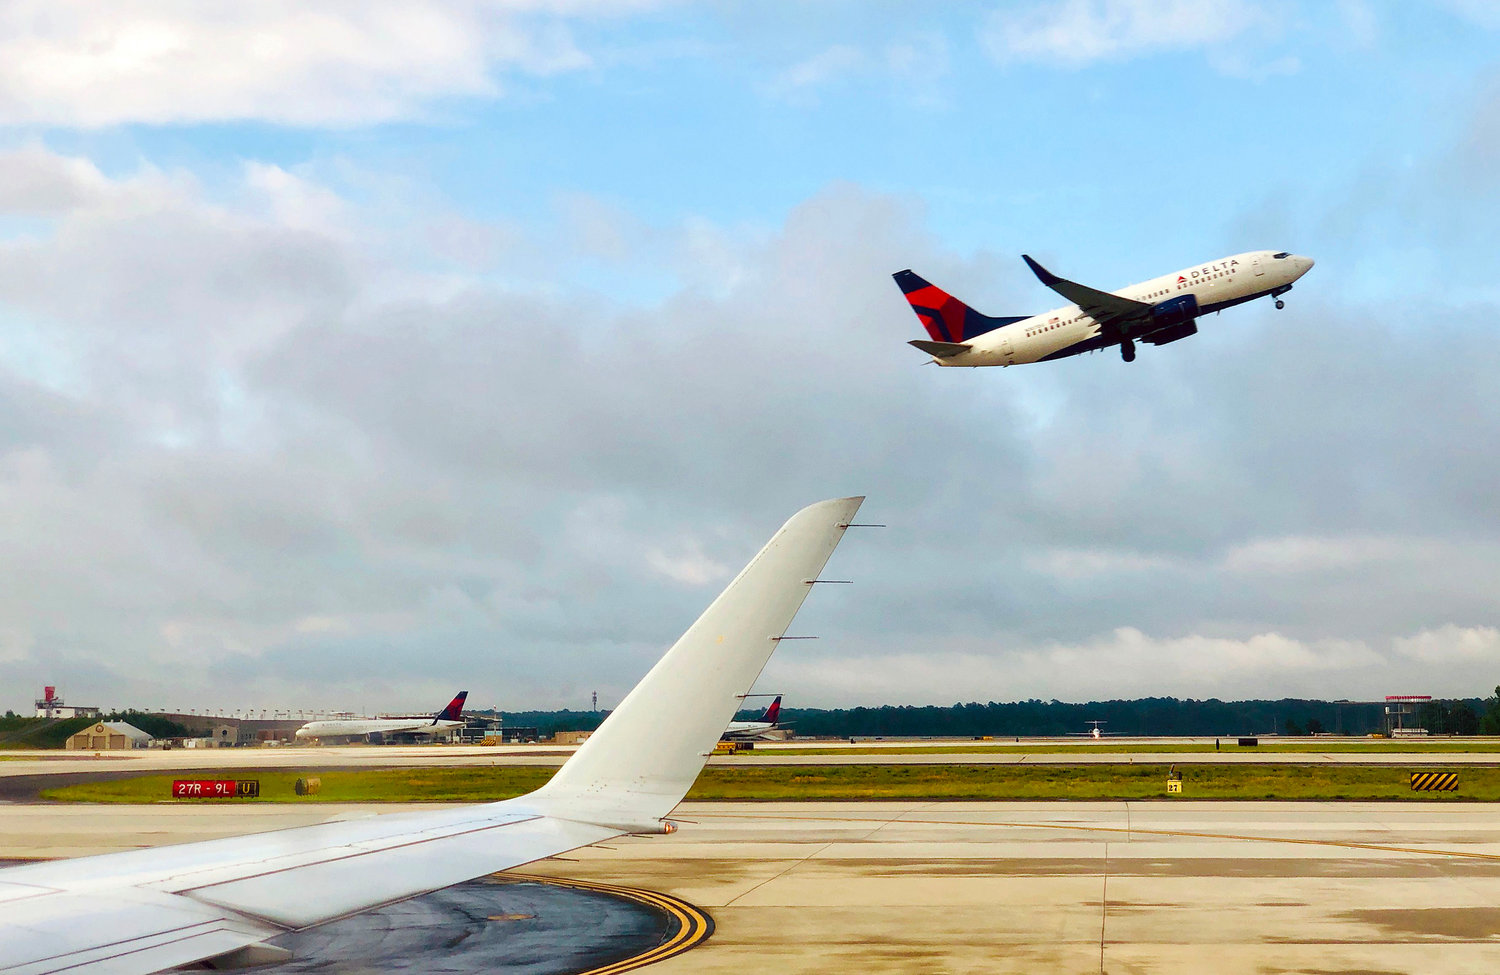 A Delta Airlines airplane takes off from Atlanta International Airport, Georgia, on June 10, 2019. (Daniel Slim/AFP/Getty Images/TNS)